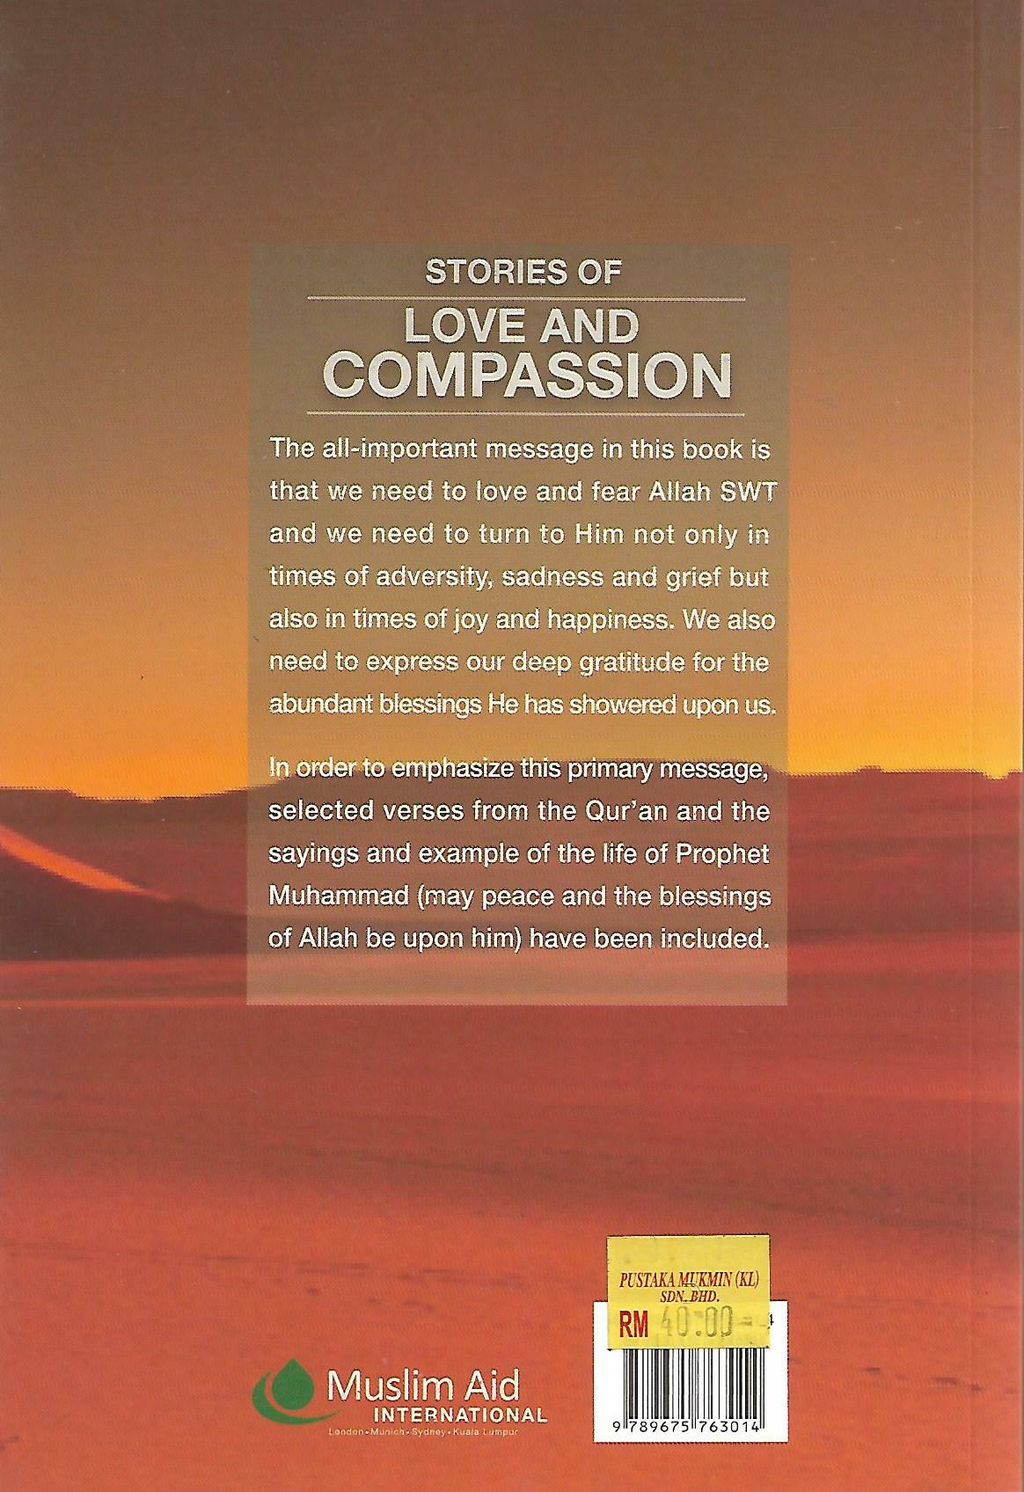 love and compassion rm40_0002.jpg